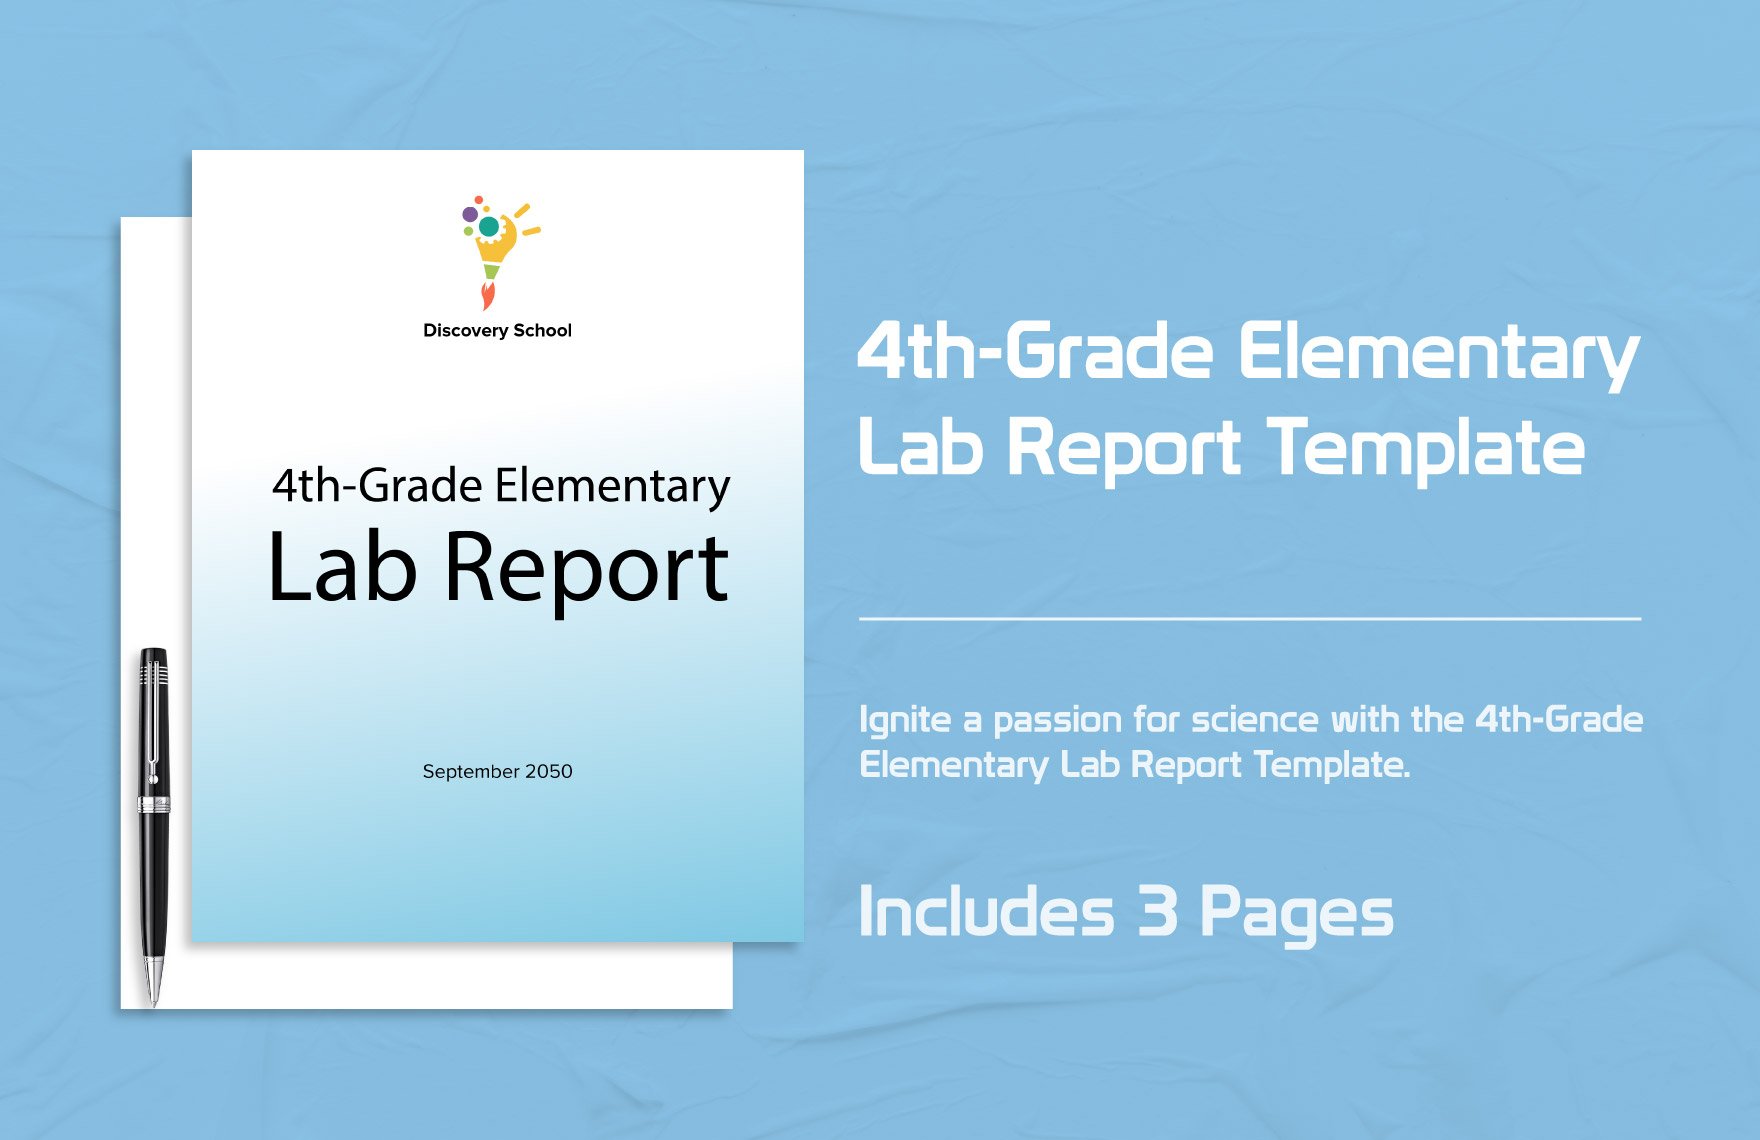 4th-Grade Elementary Lab Report Template